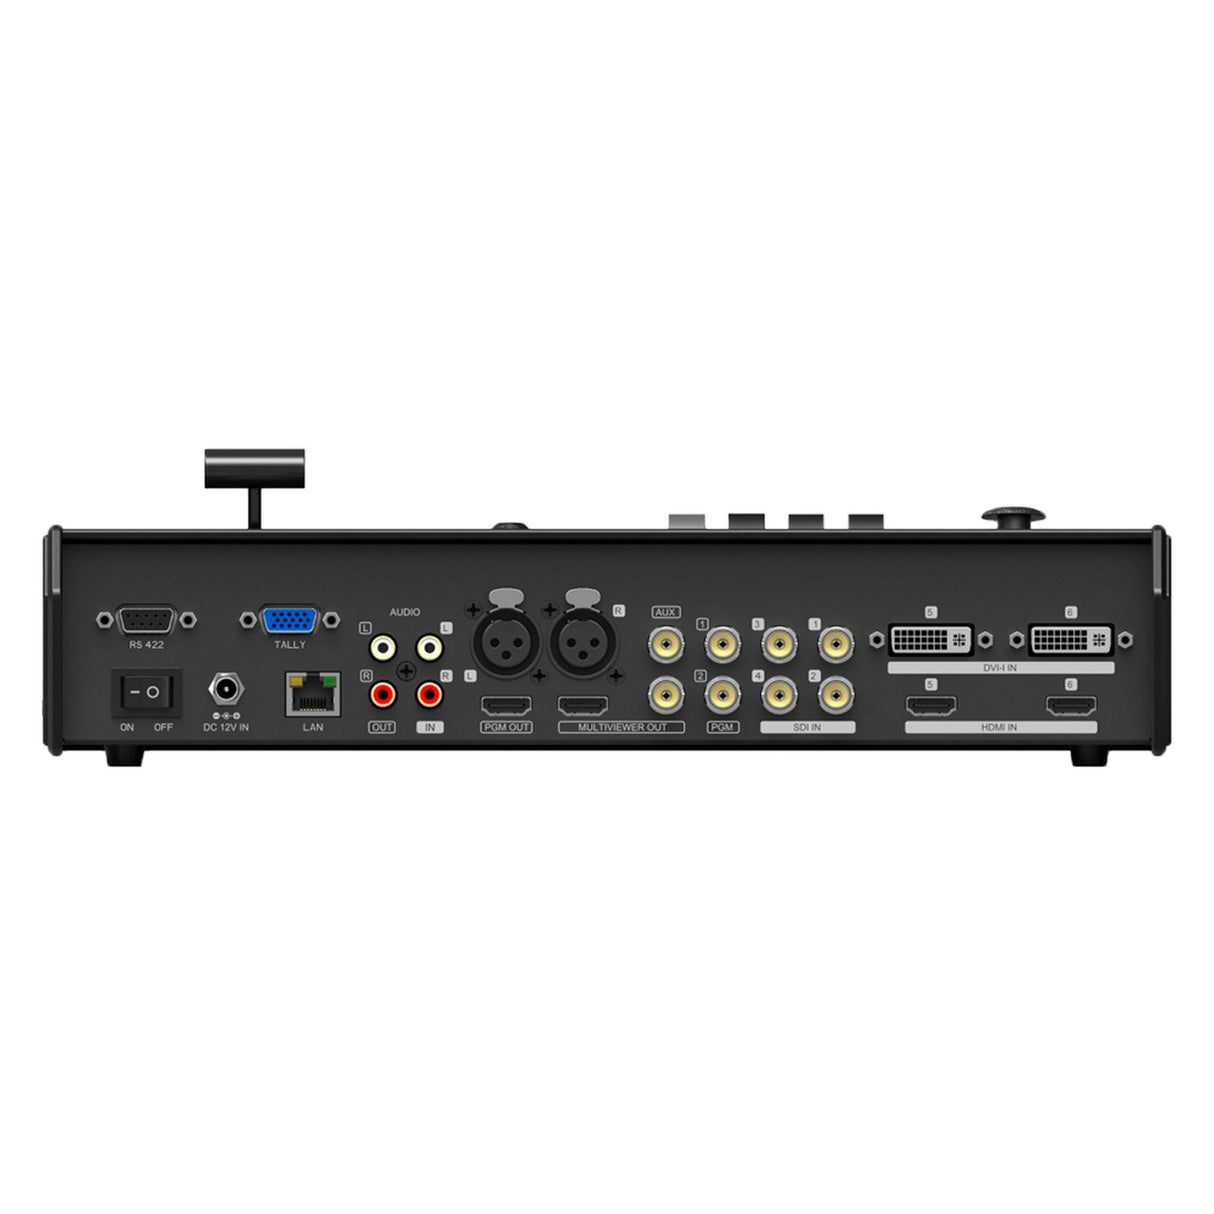 PureLink BS-6000 6 x 1 Full HD Broadcast Switch with Camera Control and Recording